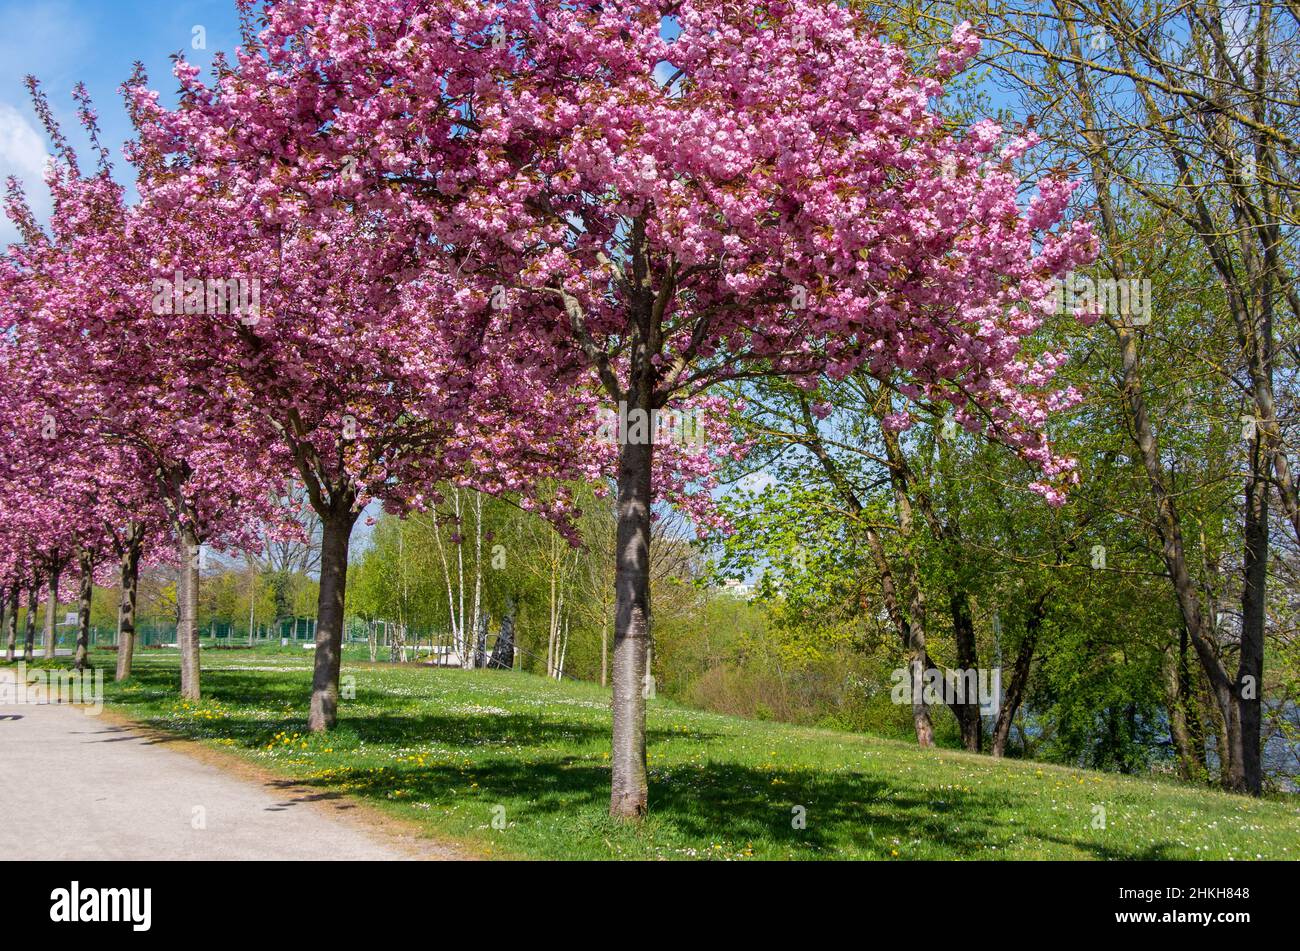 Flowering ornamental cherries in the sunlight stand in a row Stock Photo